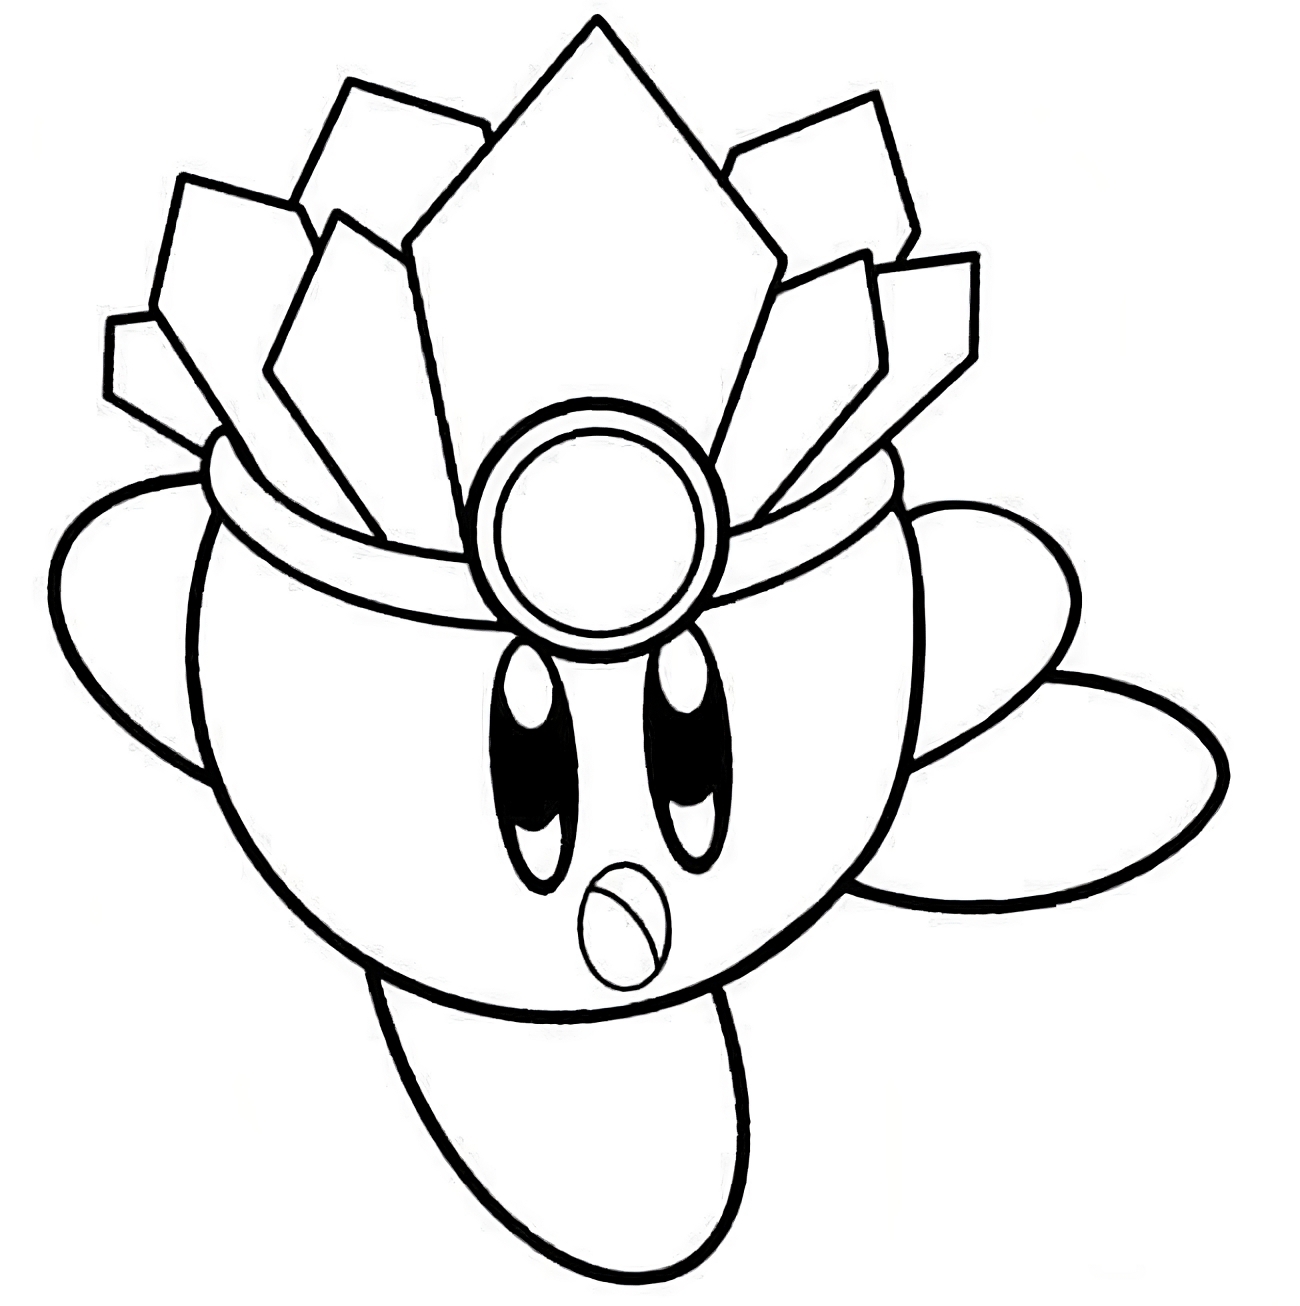 Kirby 12  coloring page to print and coloring